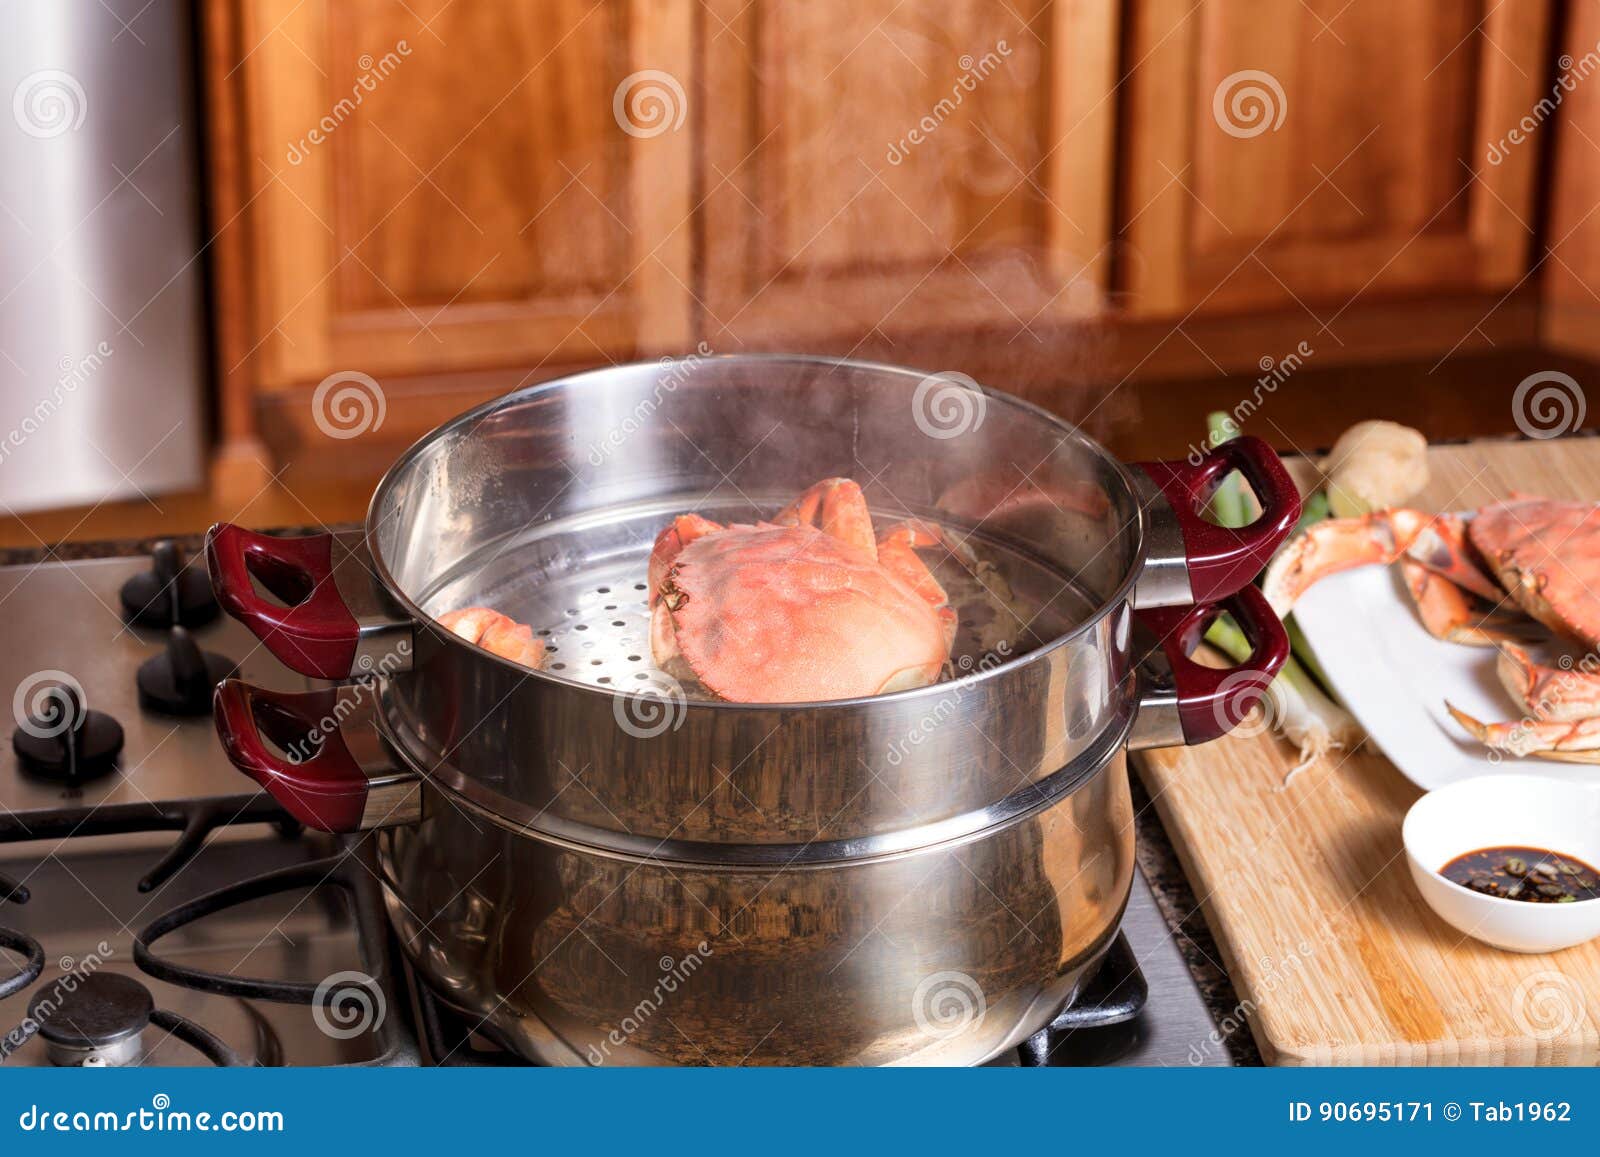 Can you steam fish in a pot фото 6